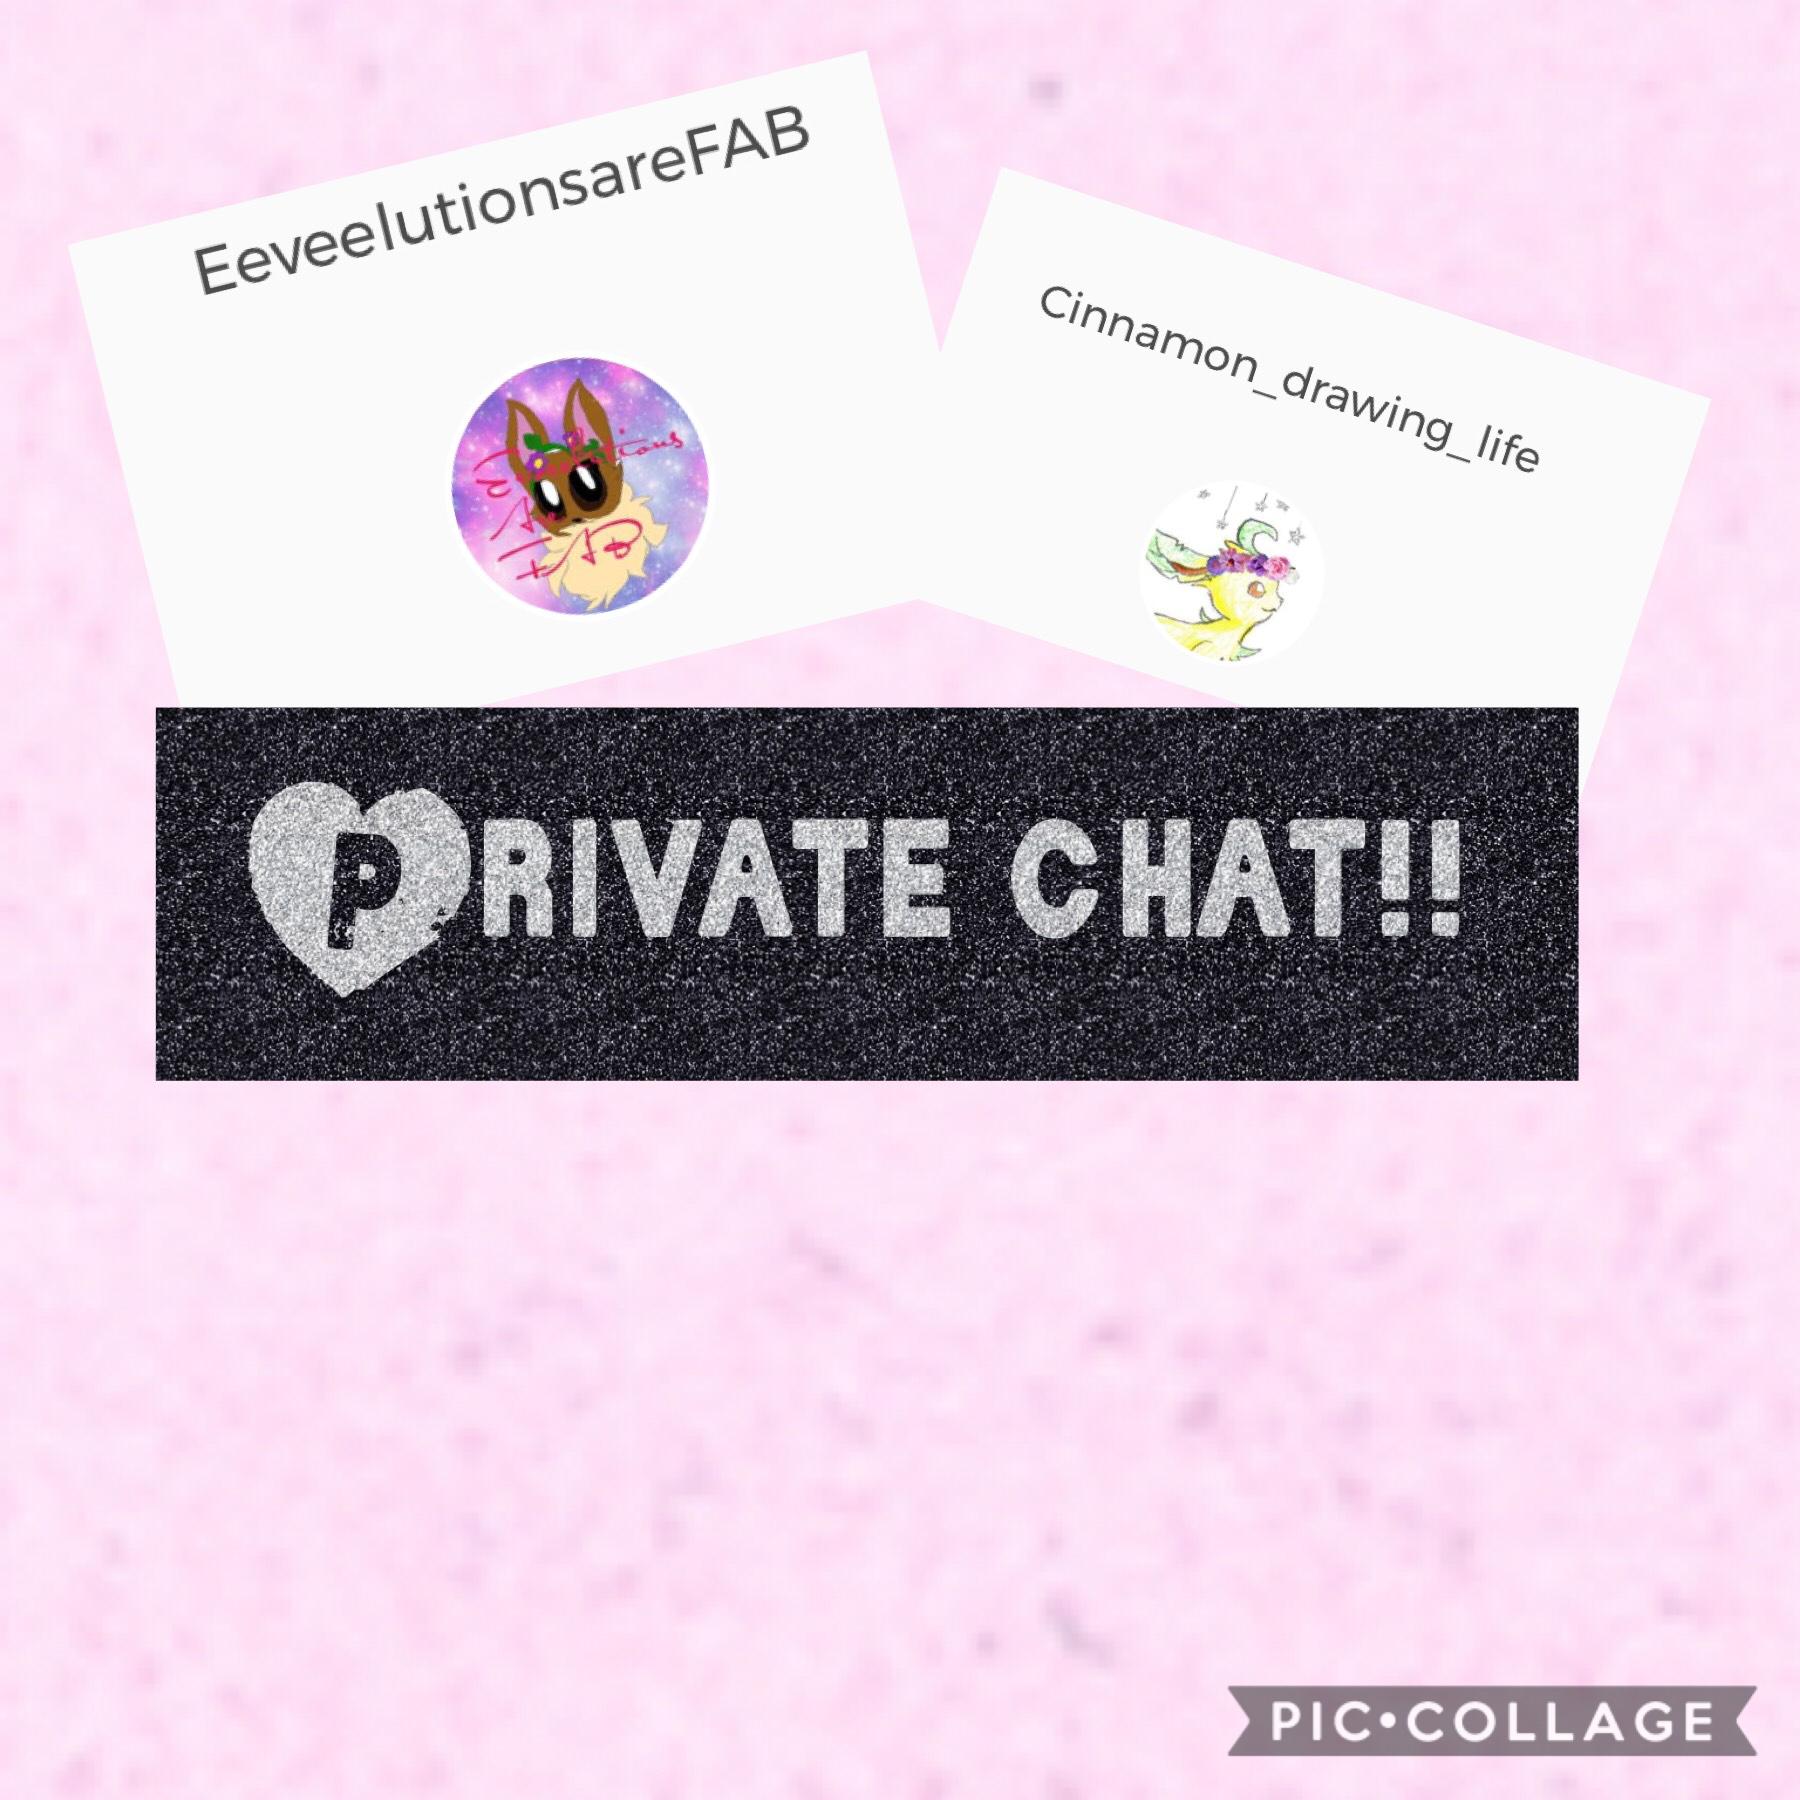 Private chat don’t snoop!